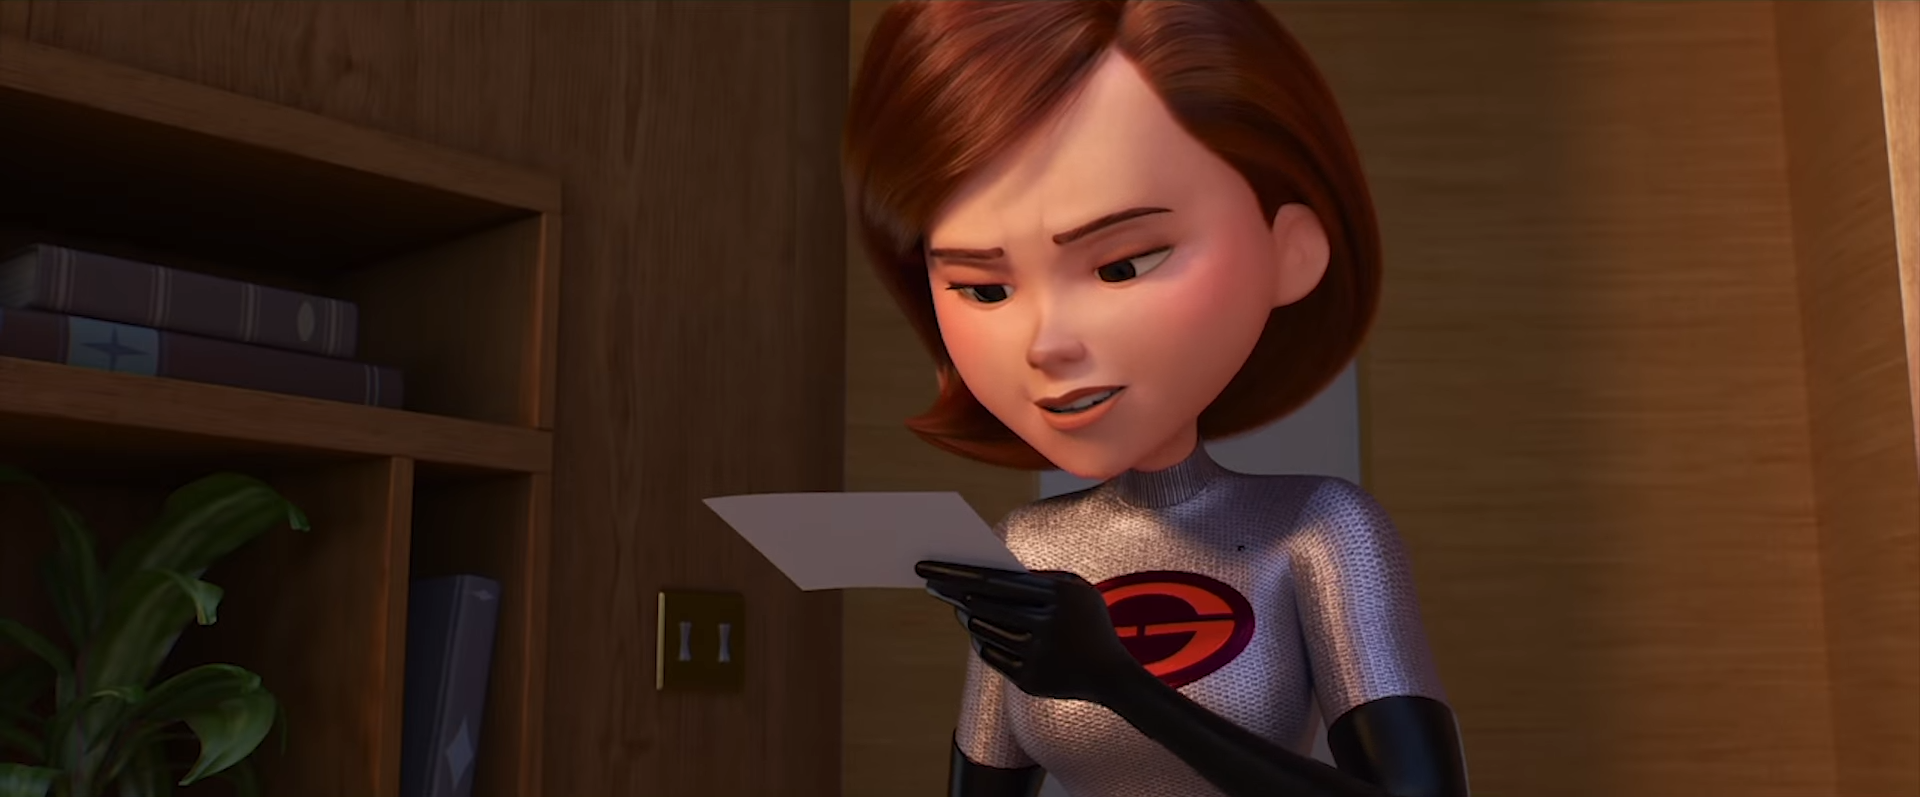 Image - Incredibles 2 223.png | Disney Wiki | FANDOM powered by Wikia